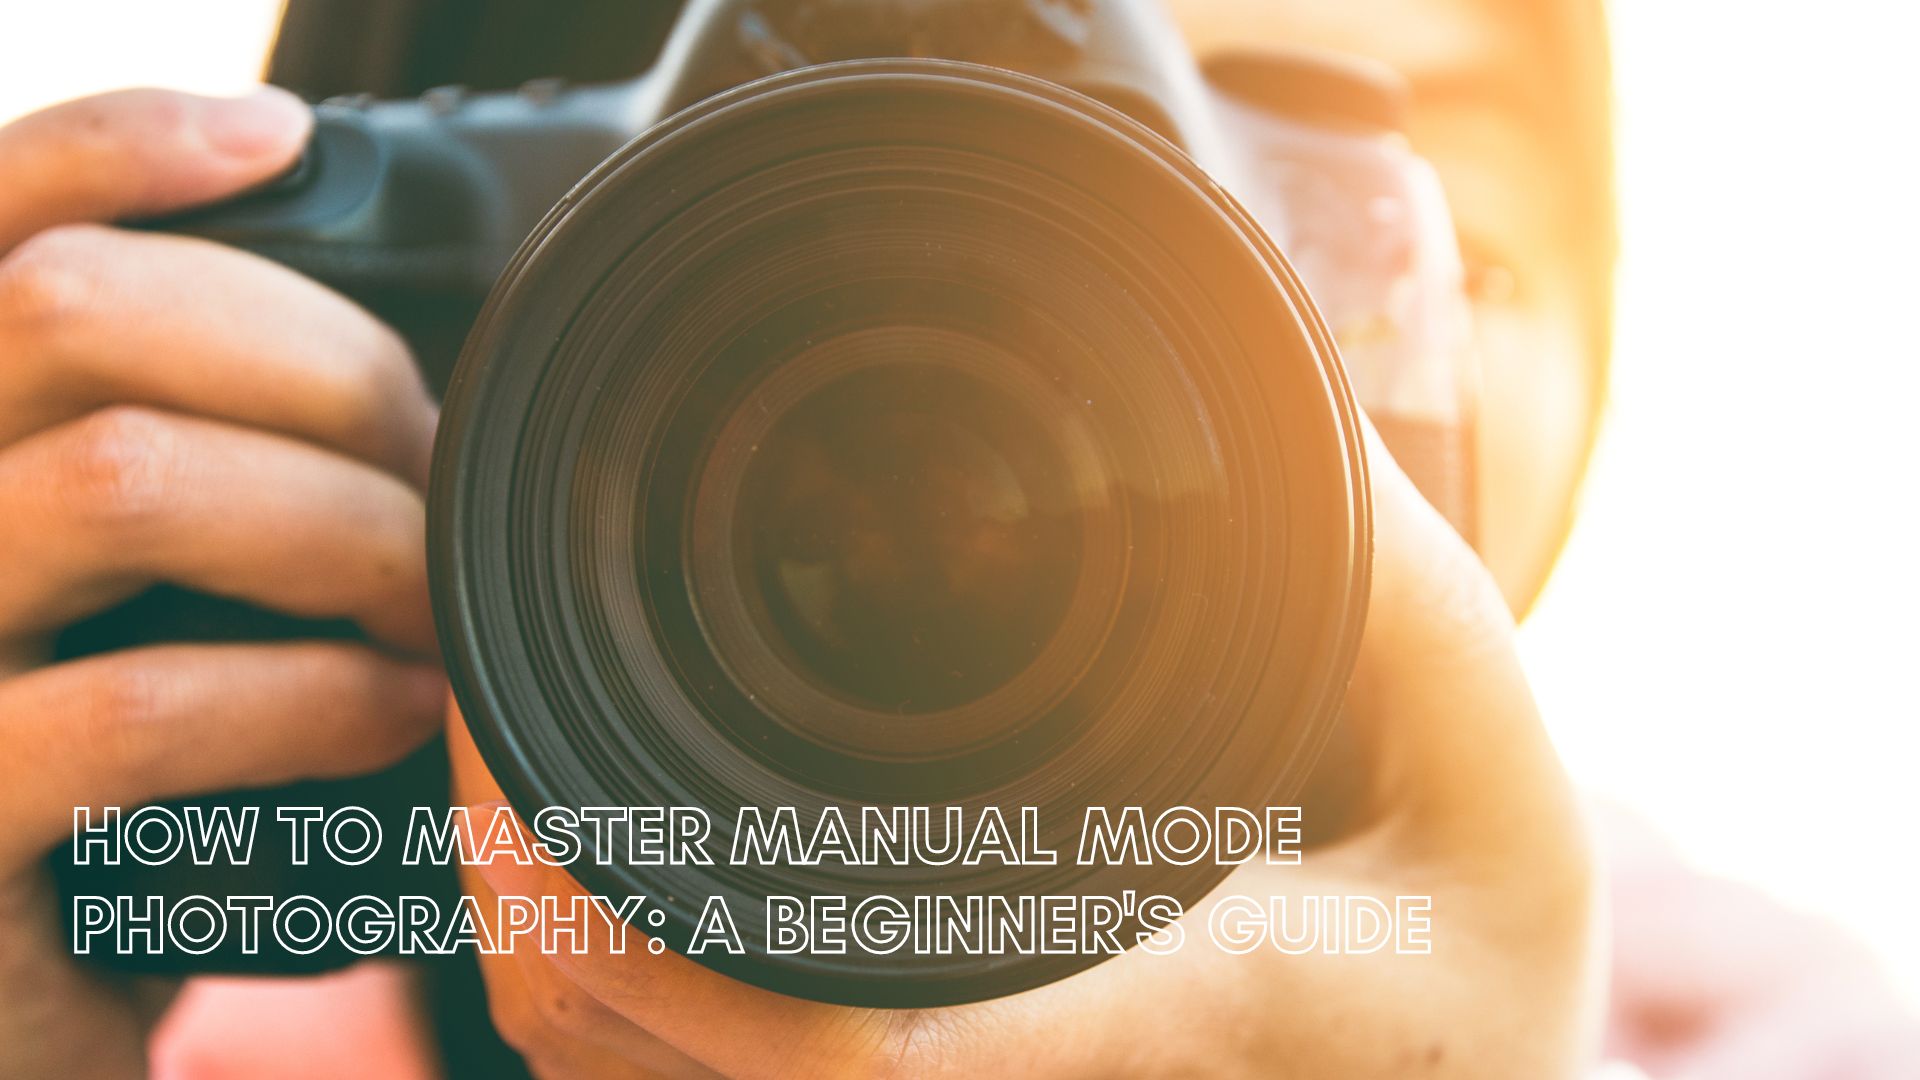 How to Master Manual Mode Photography: A Beginner’s Guide